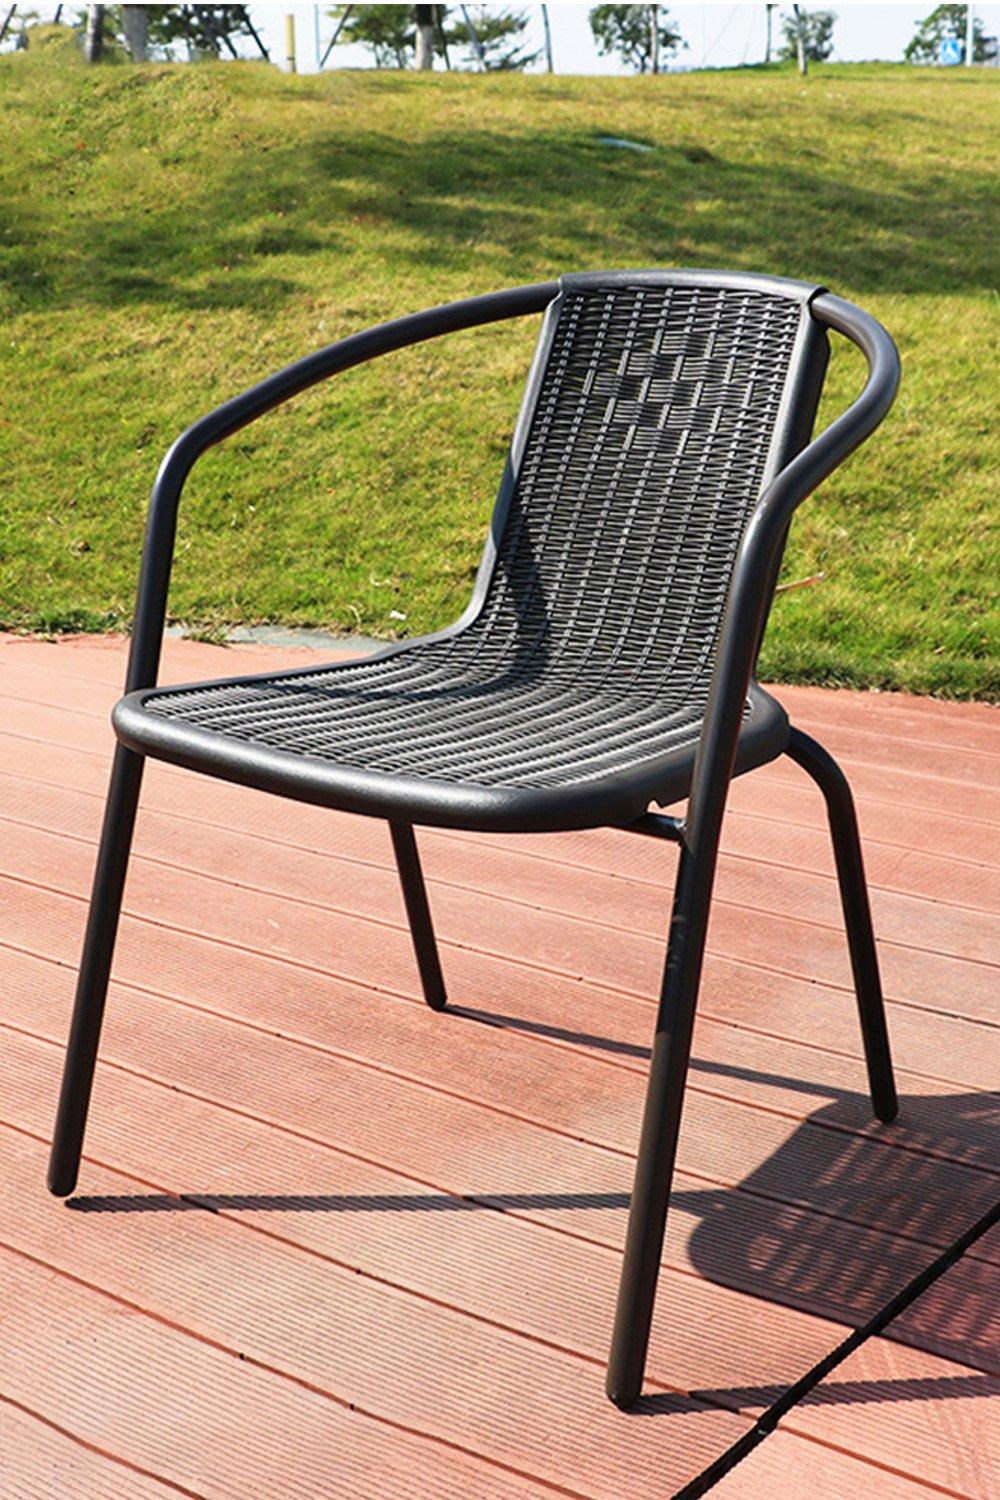 Save 62%: Rattan Stacking Garden Chairs Set of 4